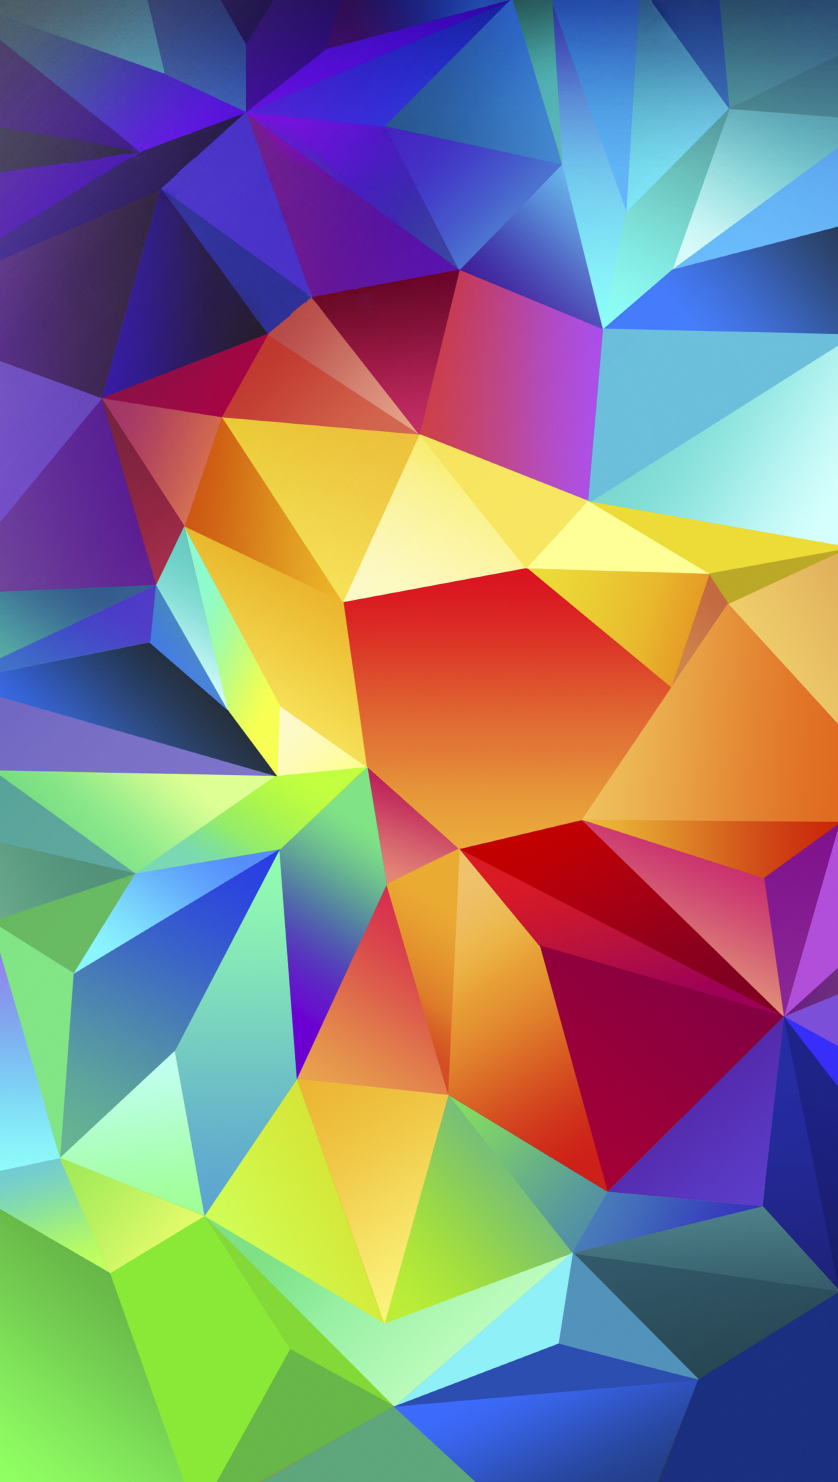 Get The Samsung Galaxy S5 Look With These Wallpaper Androidguys